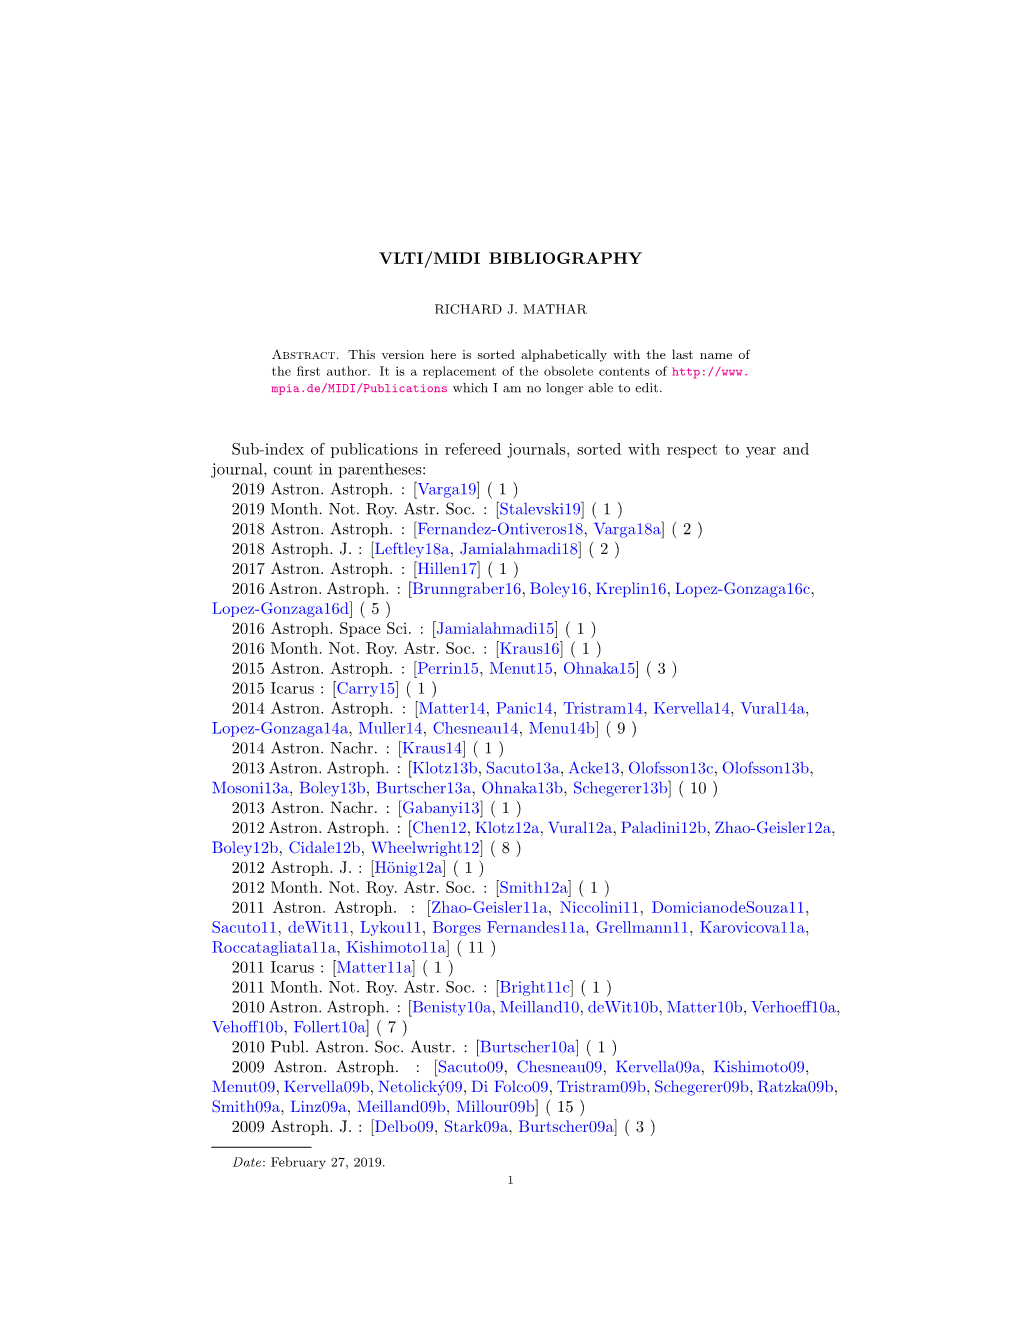 VLTI/MIDI BIBLIOGRAPHY Sub-Index of Publications in Refereed Journals